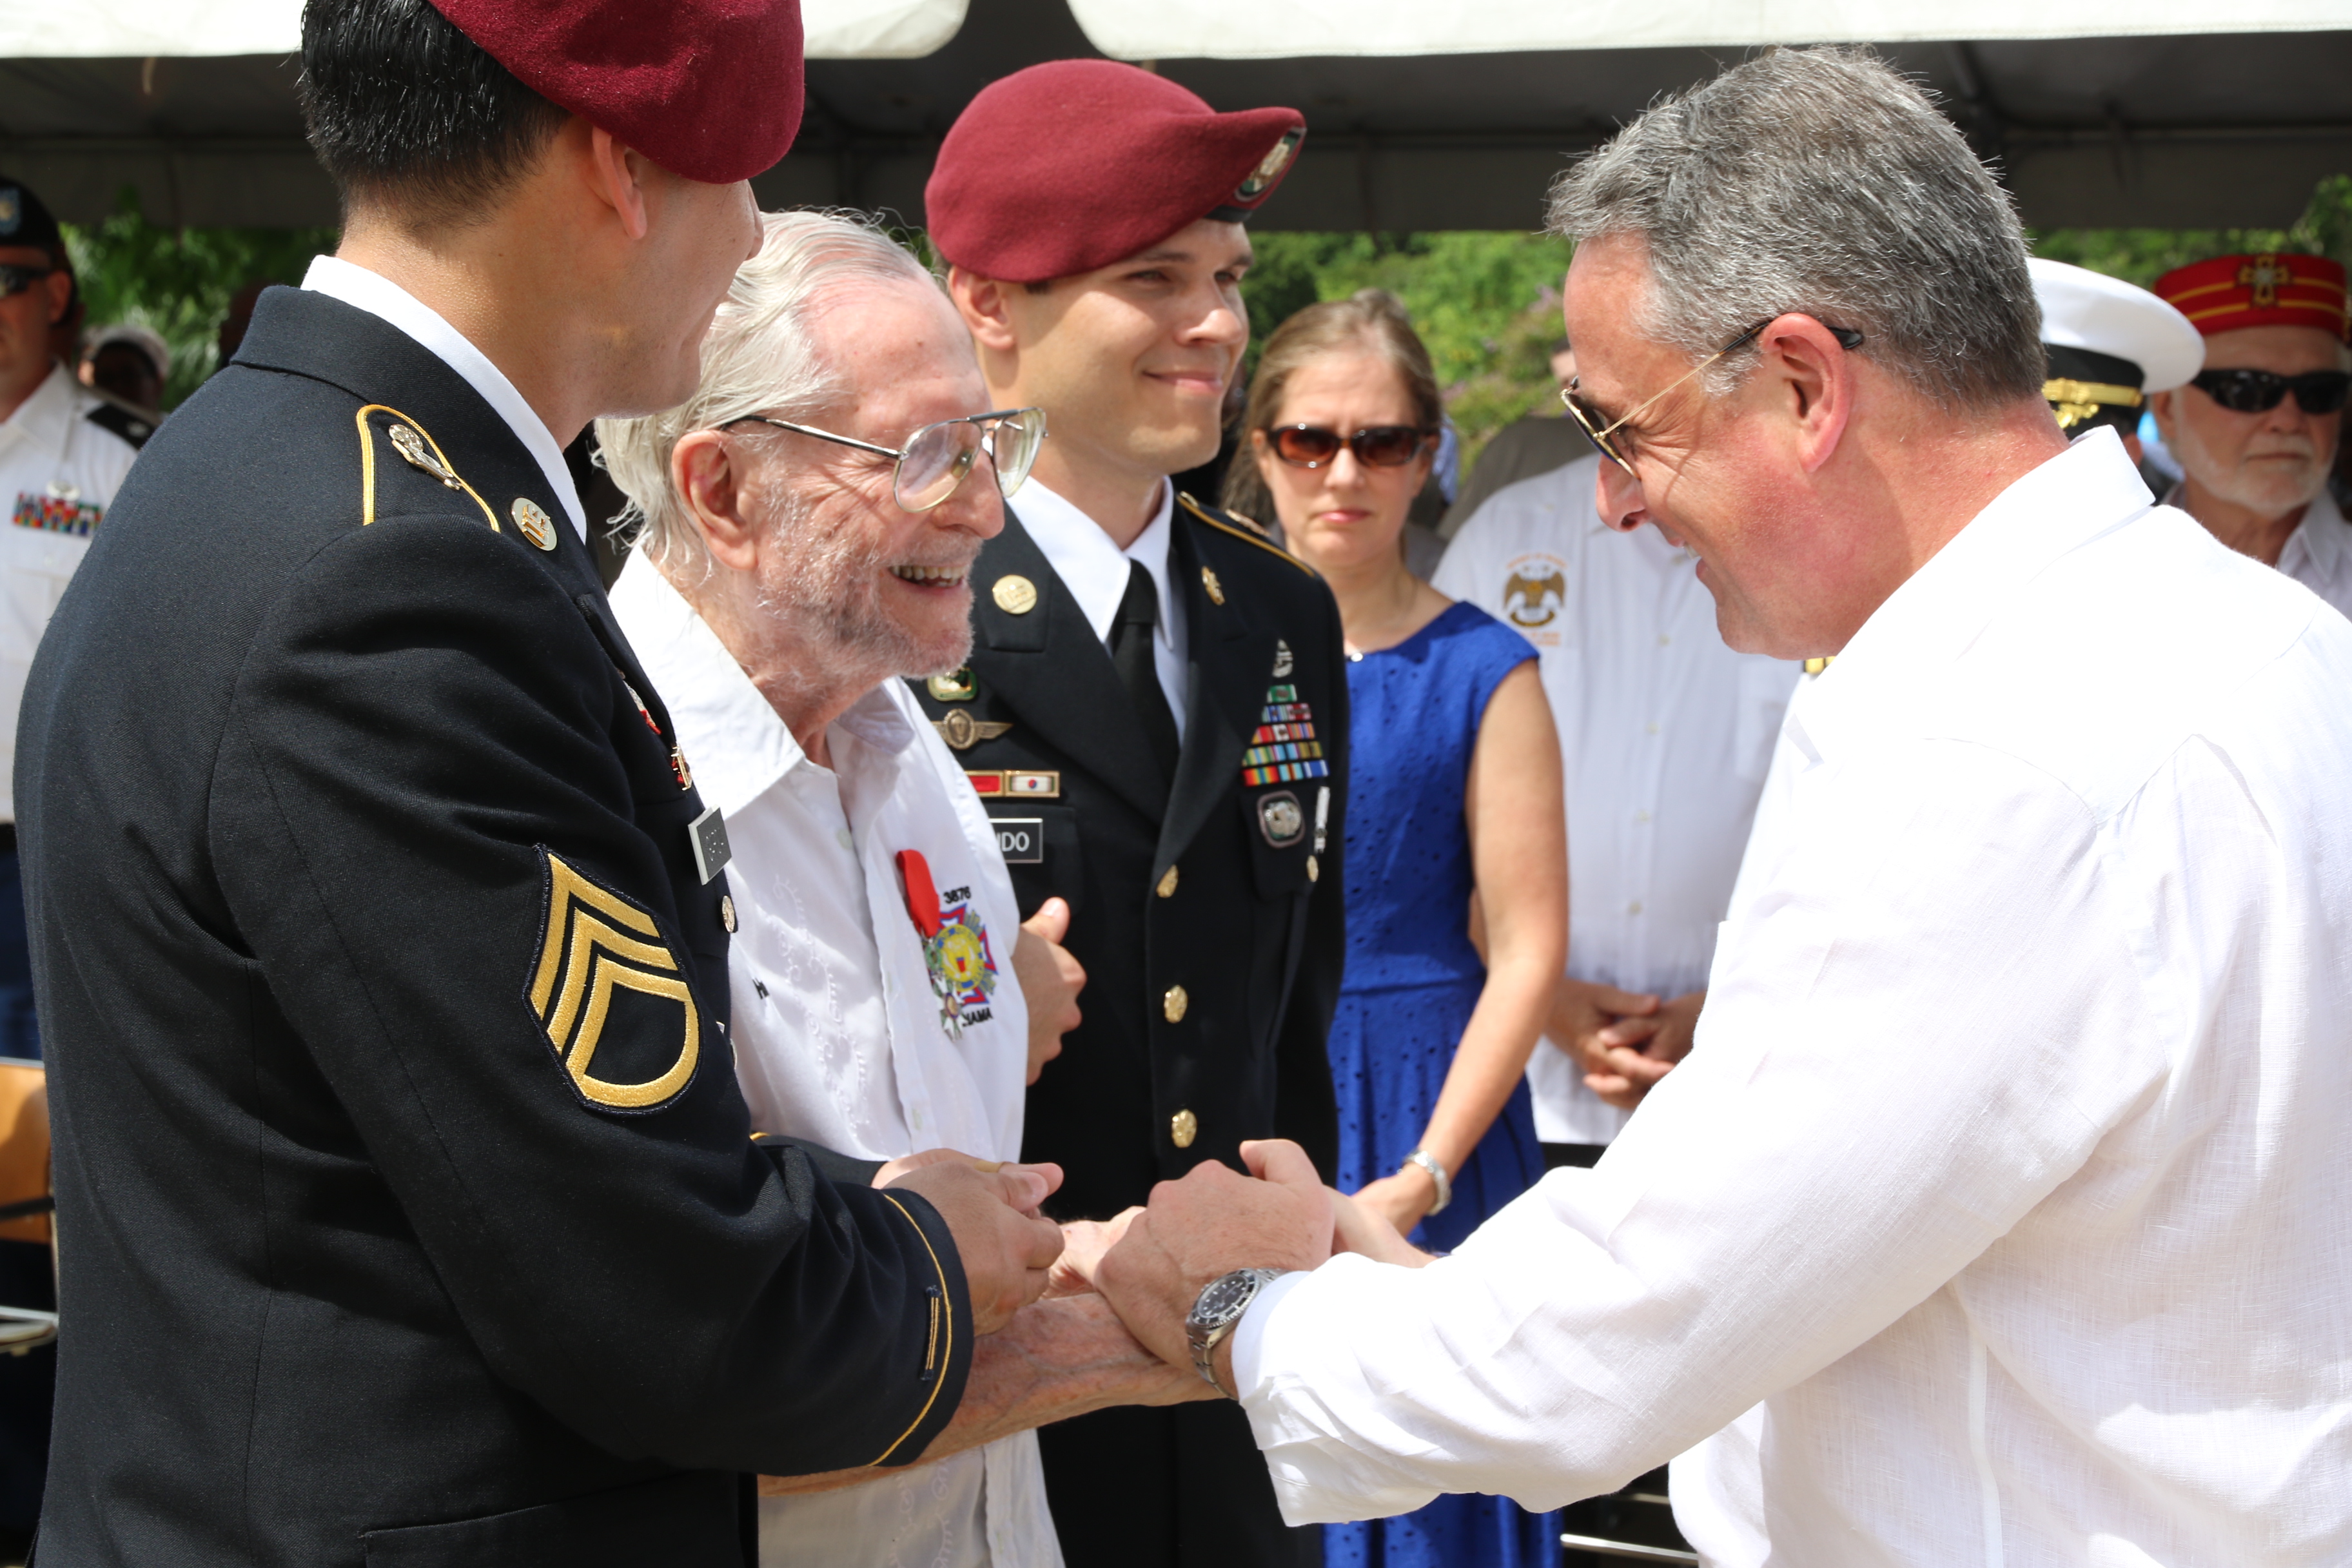 The U.S. Ambassador shakes hands with Herbert Friedlander, who is flanked by two American soldiers. 